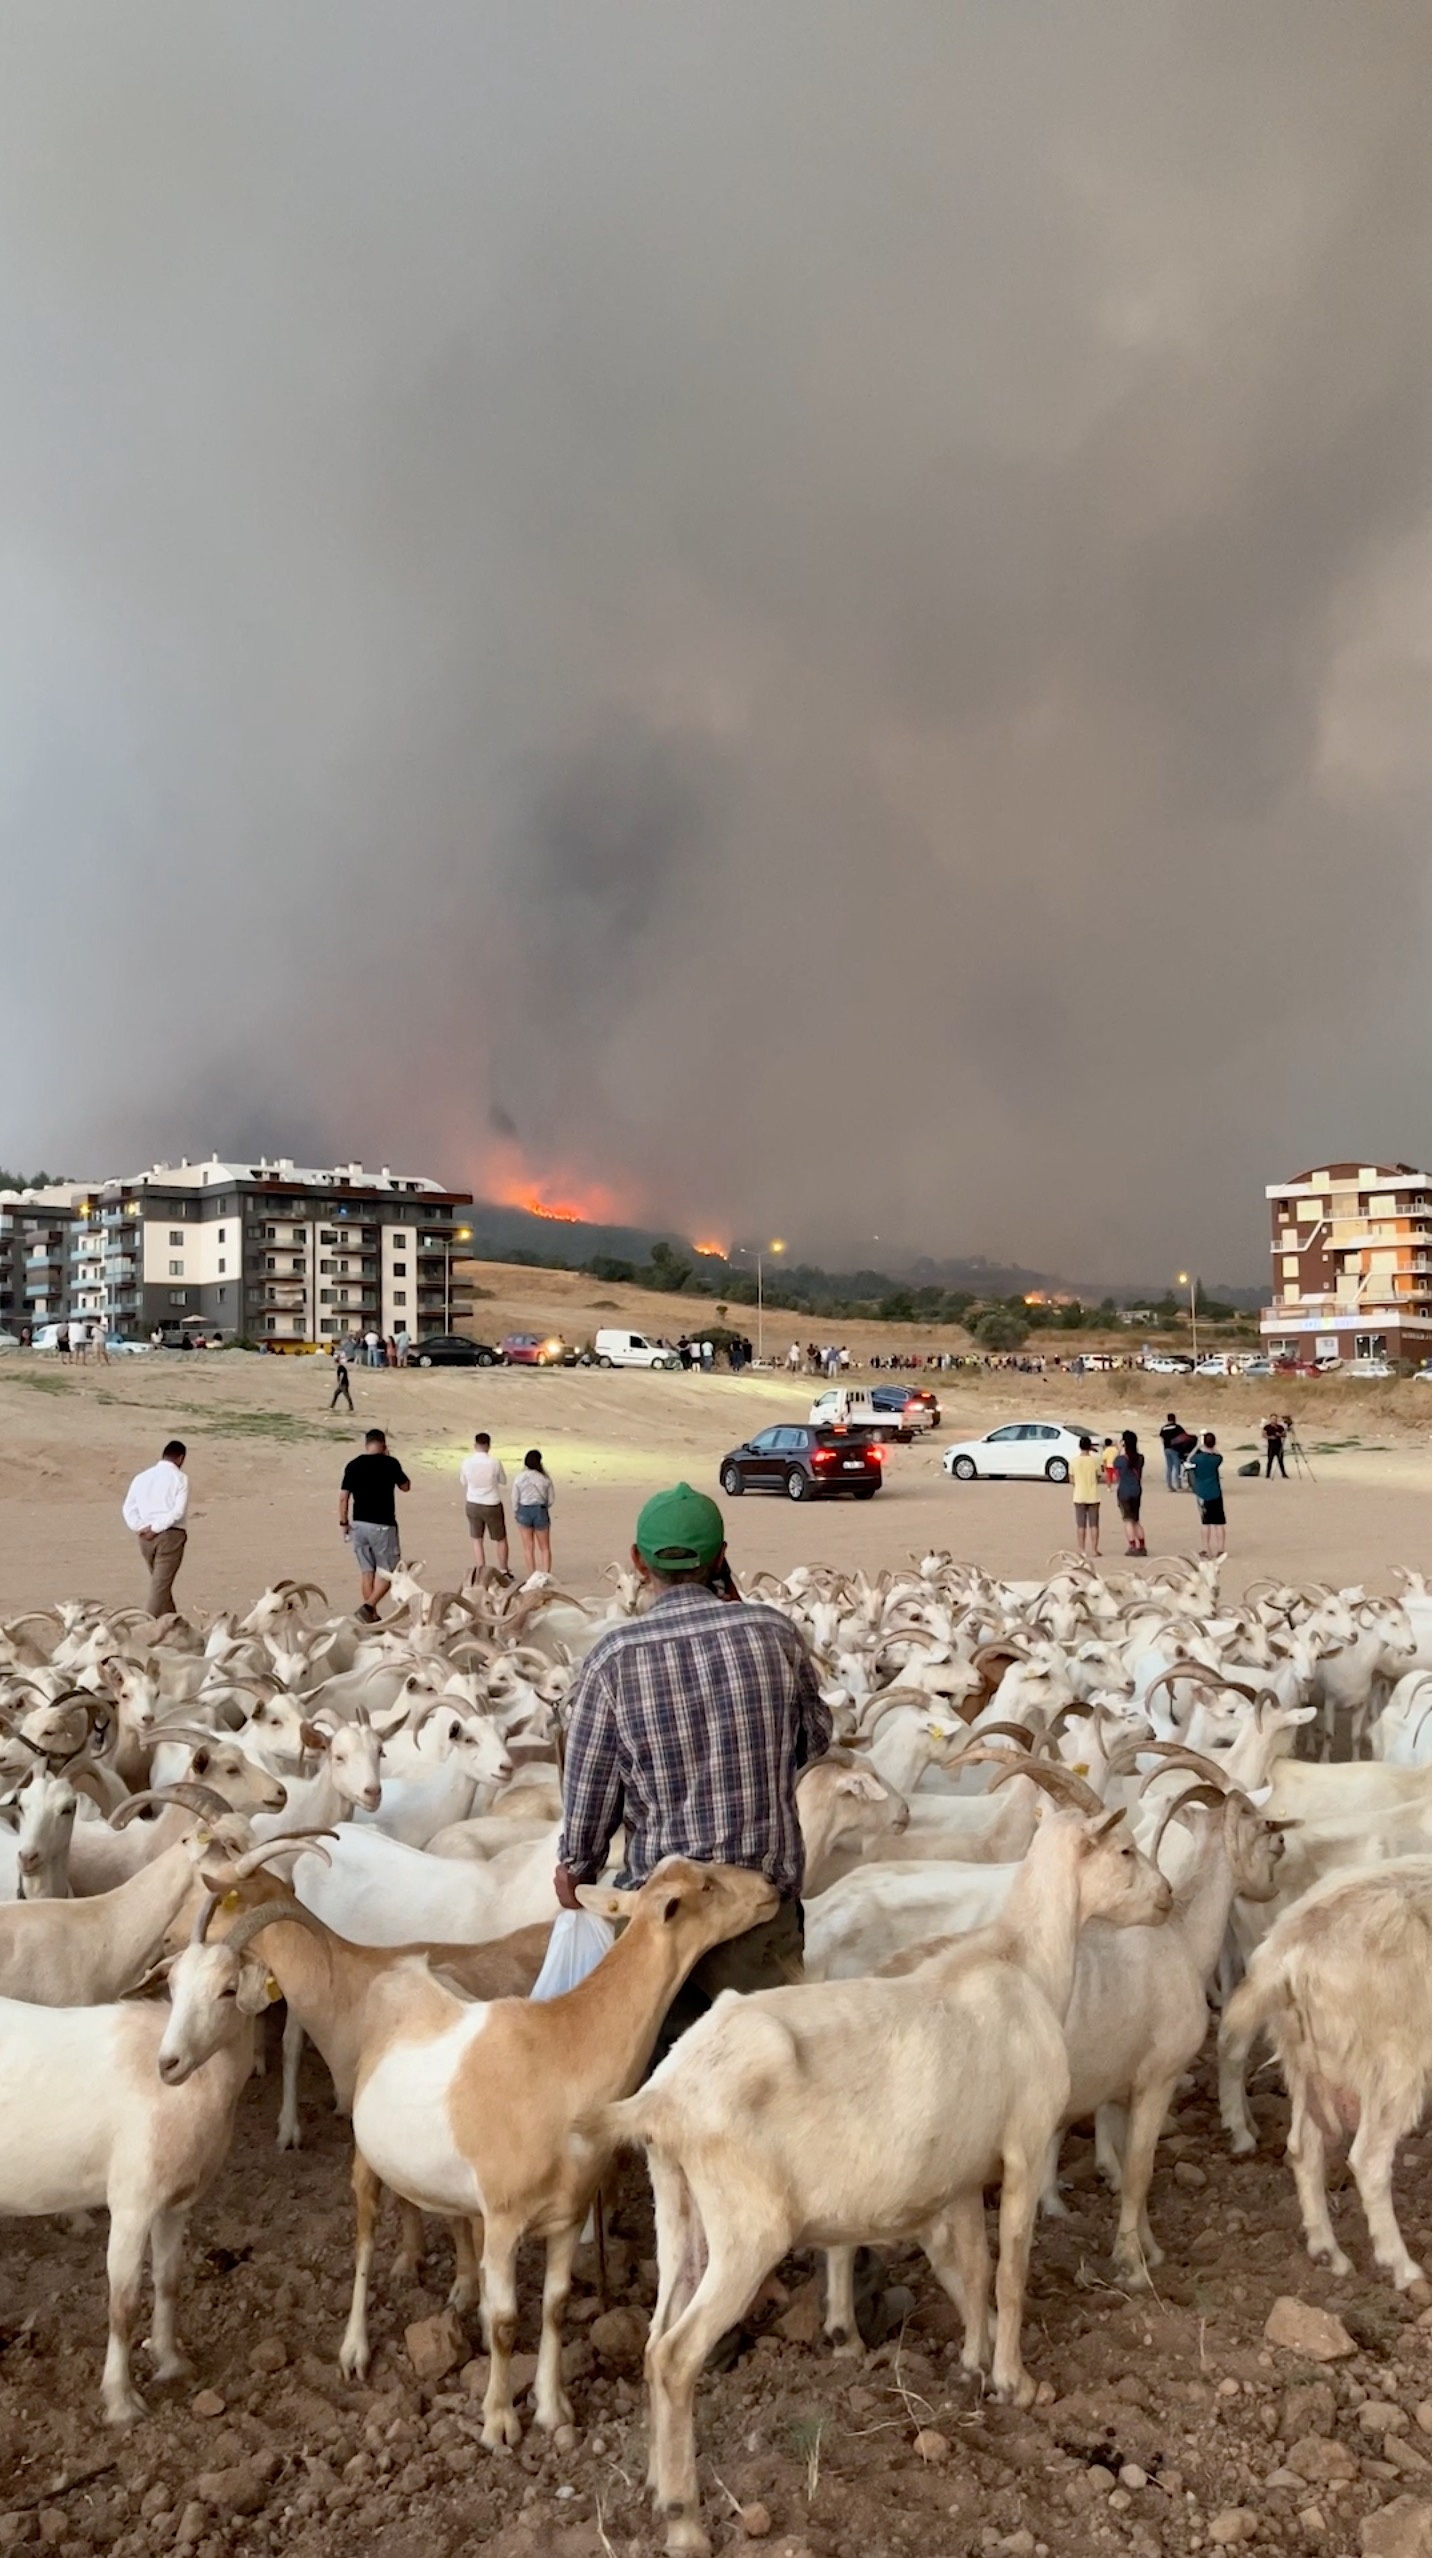 People watch from a distance as smoke billows from a wildfire in the background, in Canakkale